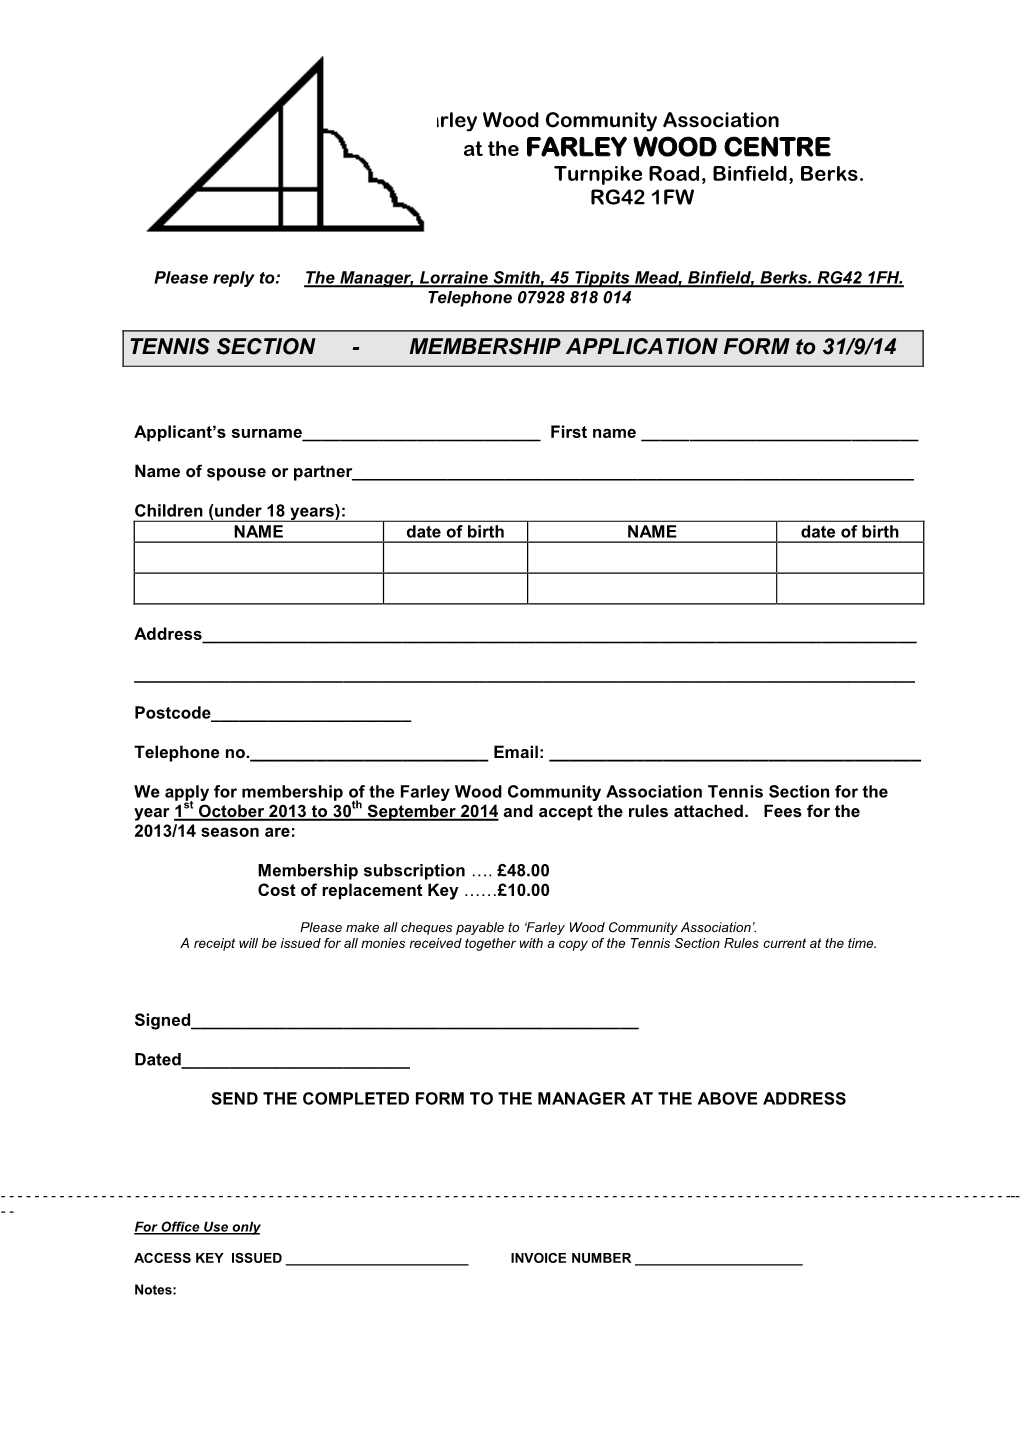 TENNIS SECTION - MEMBERSHIP APPLICATION FORM to 31/9/14